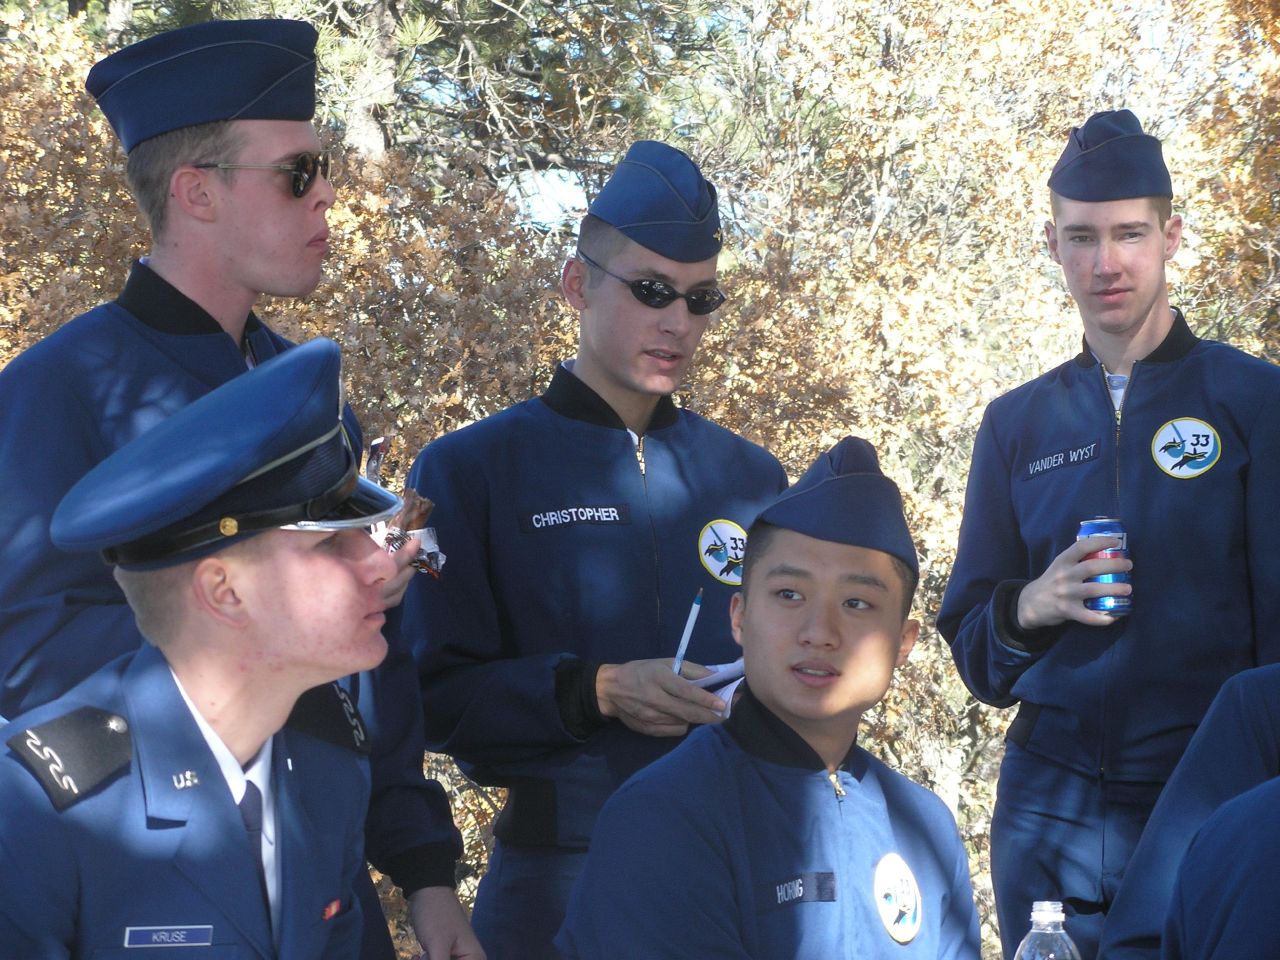 a group of people standing around each other wearing blue uniforms